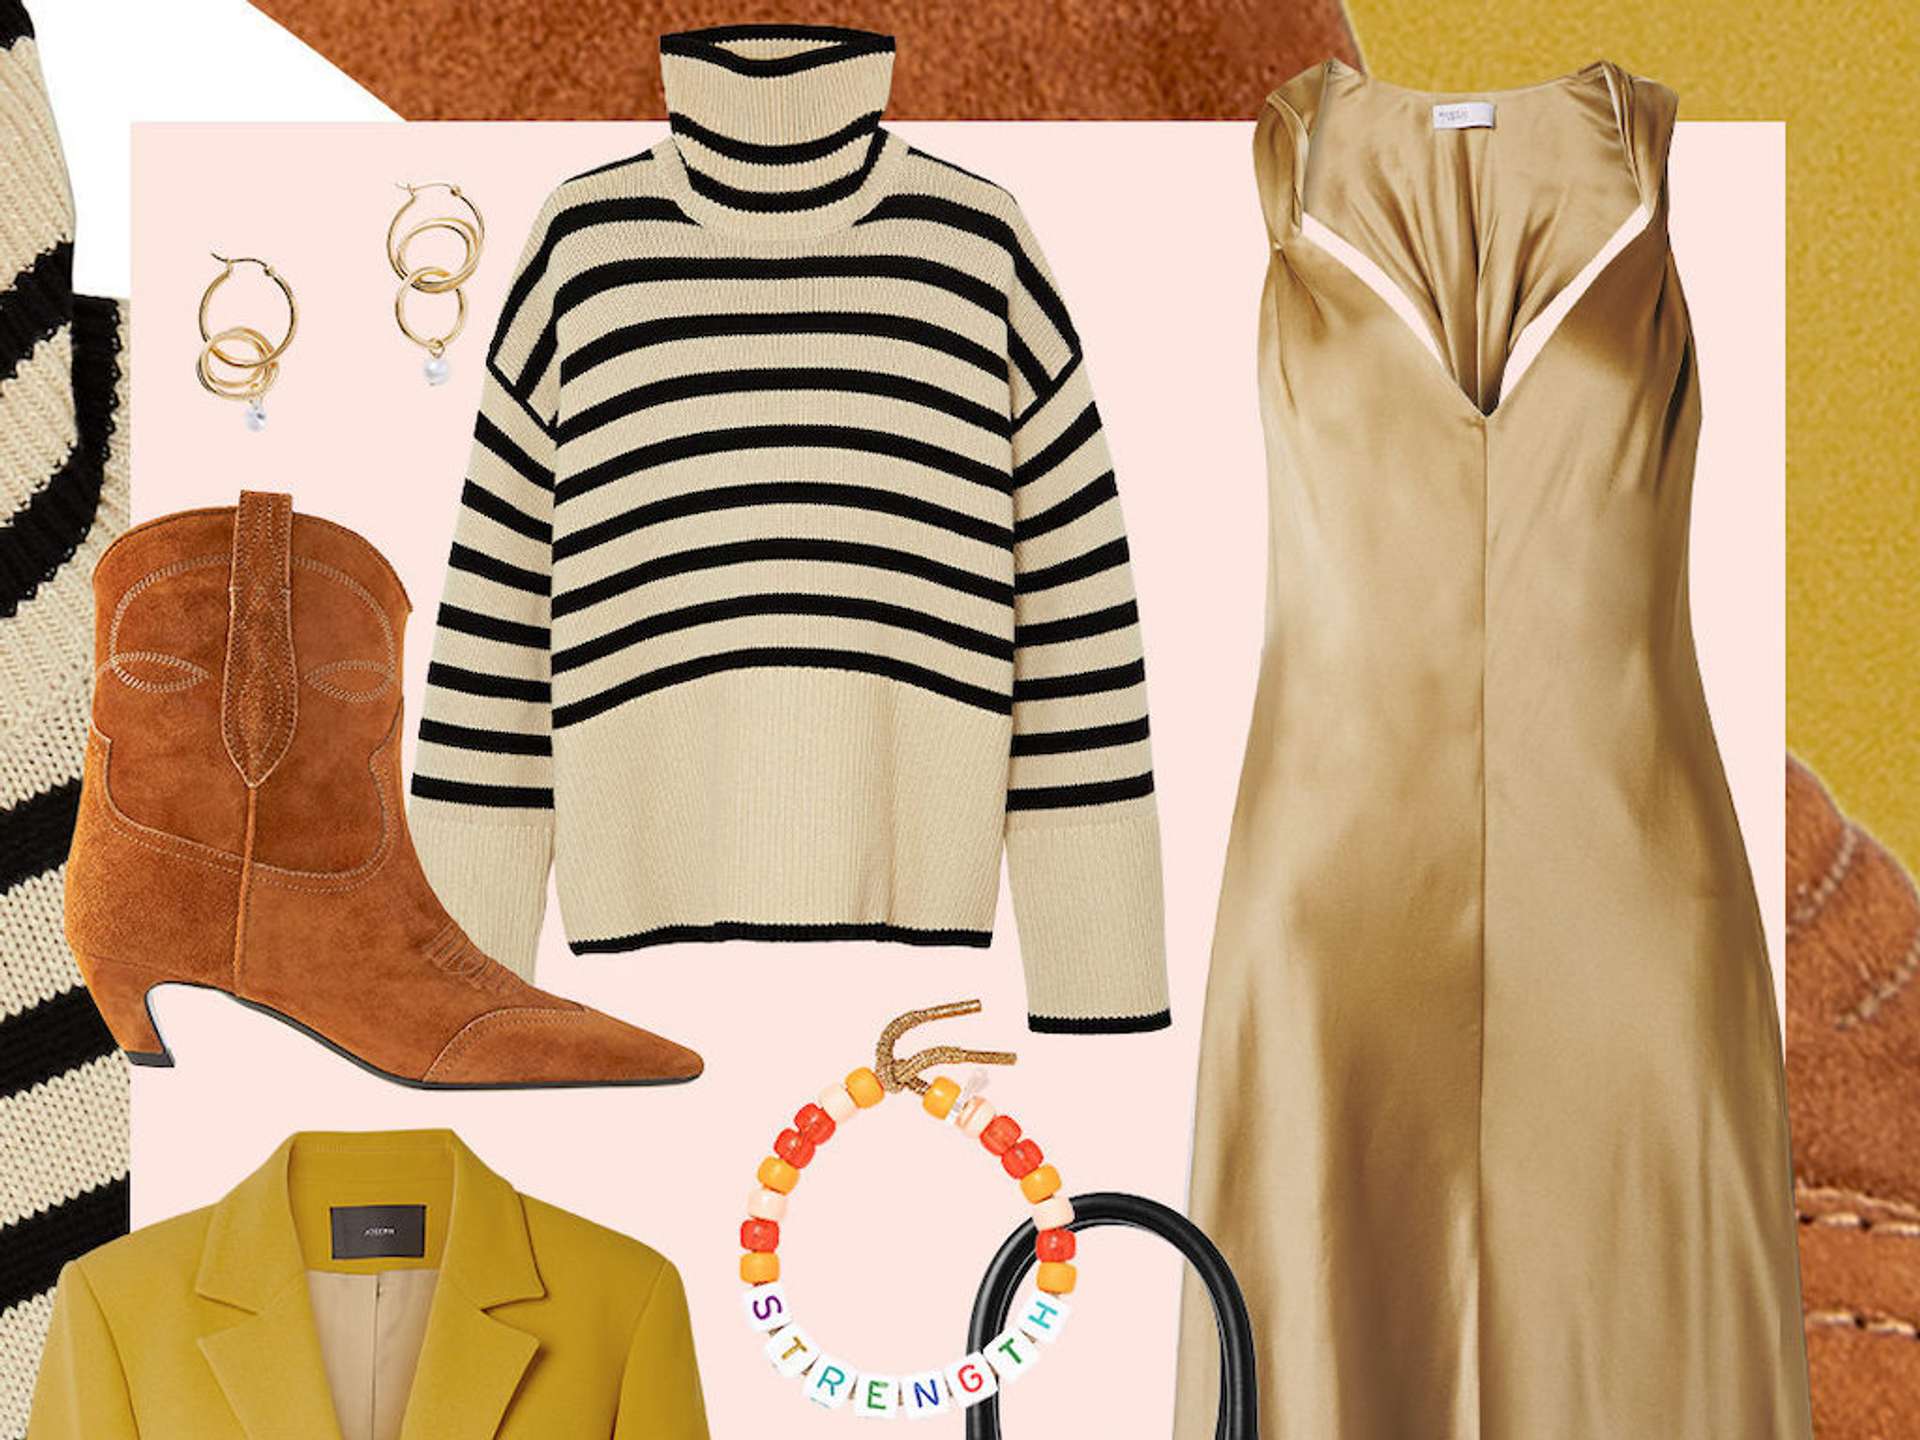 A collage of many different items of clothing on a colourful background. These include boots, a jumper, a bracelet, a dress, earrings and a blazer.